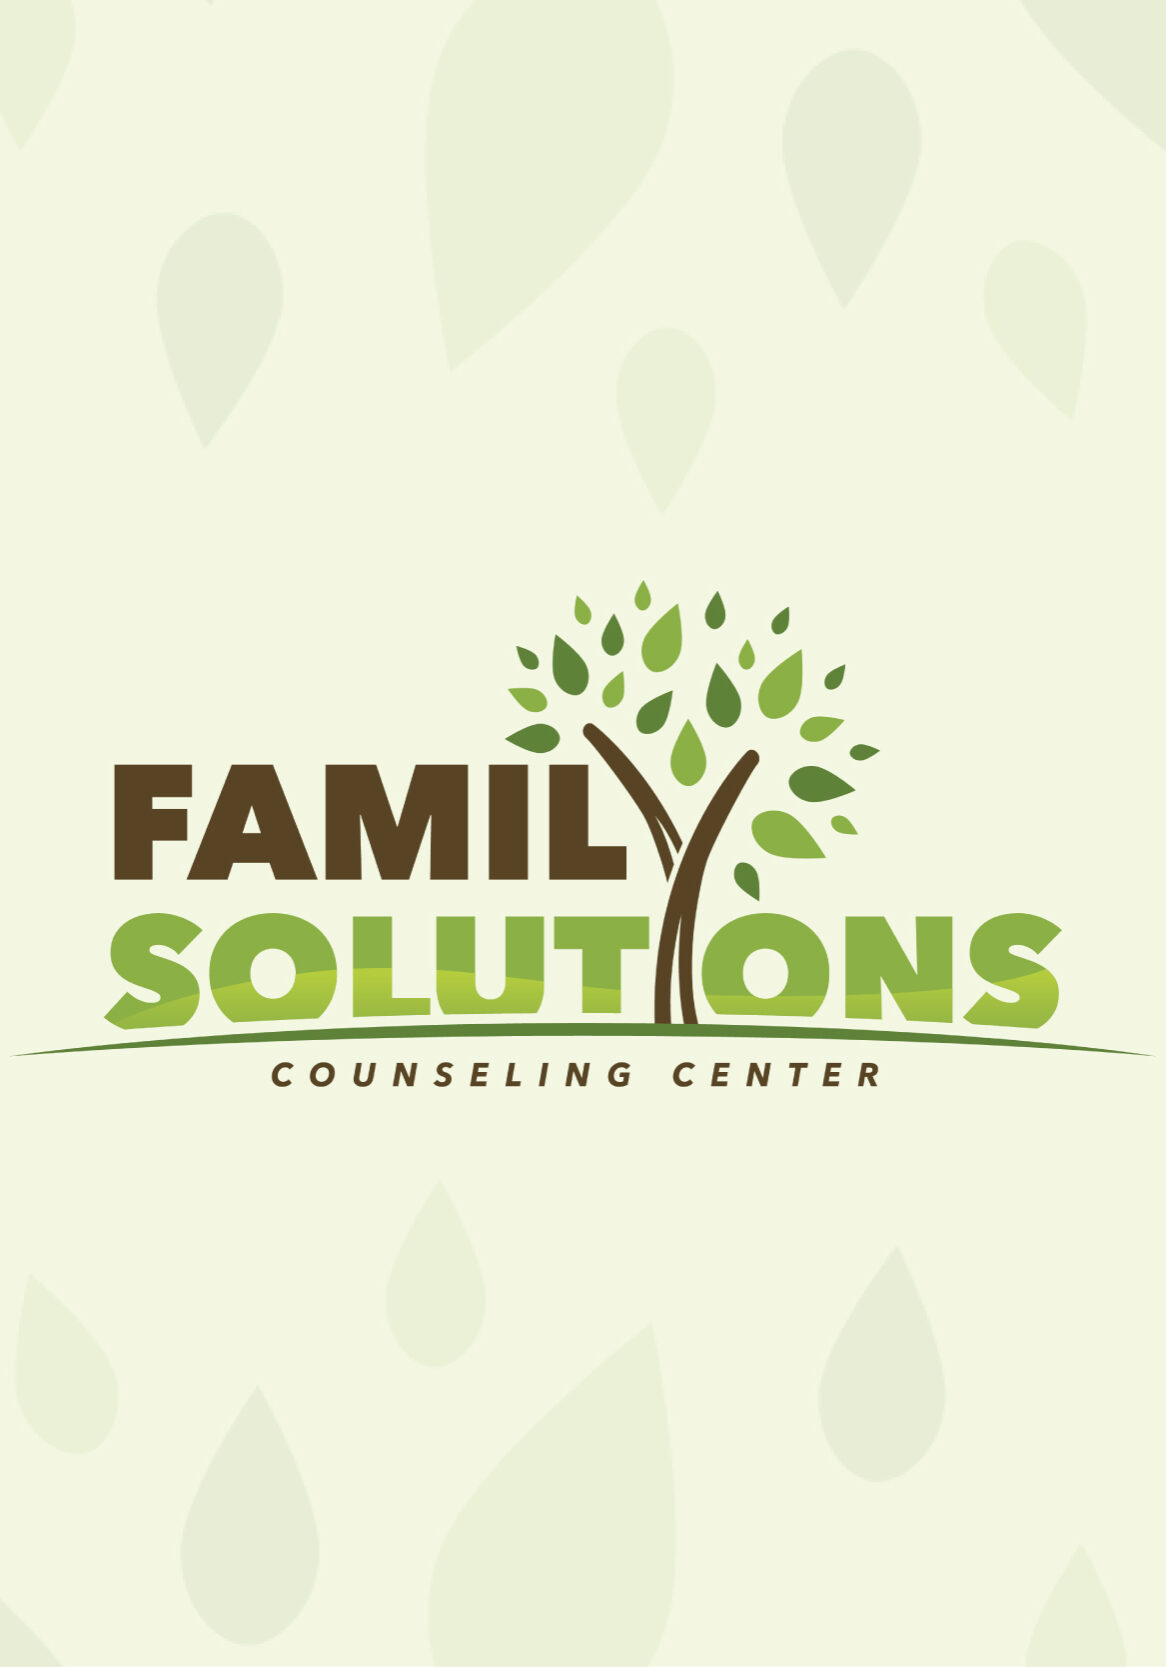 Family Solutions Counseling Center | SnapMe Creative